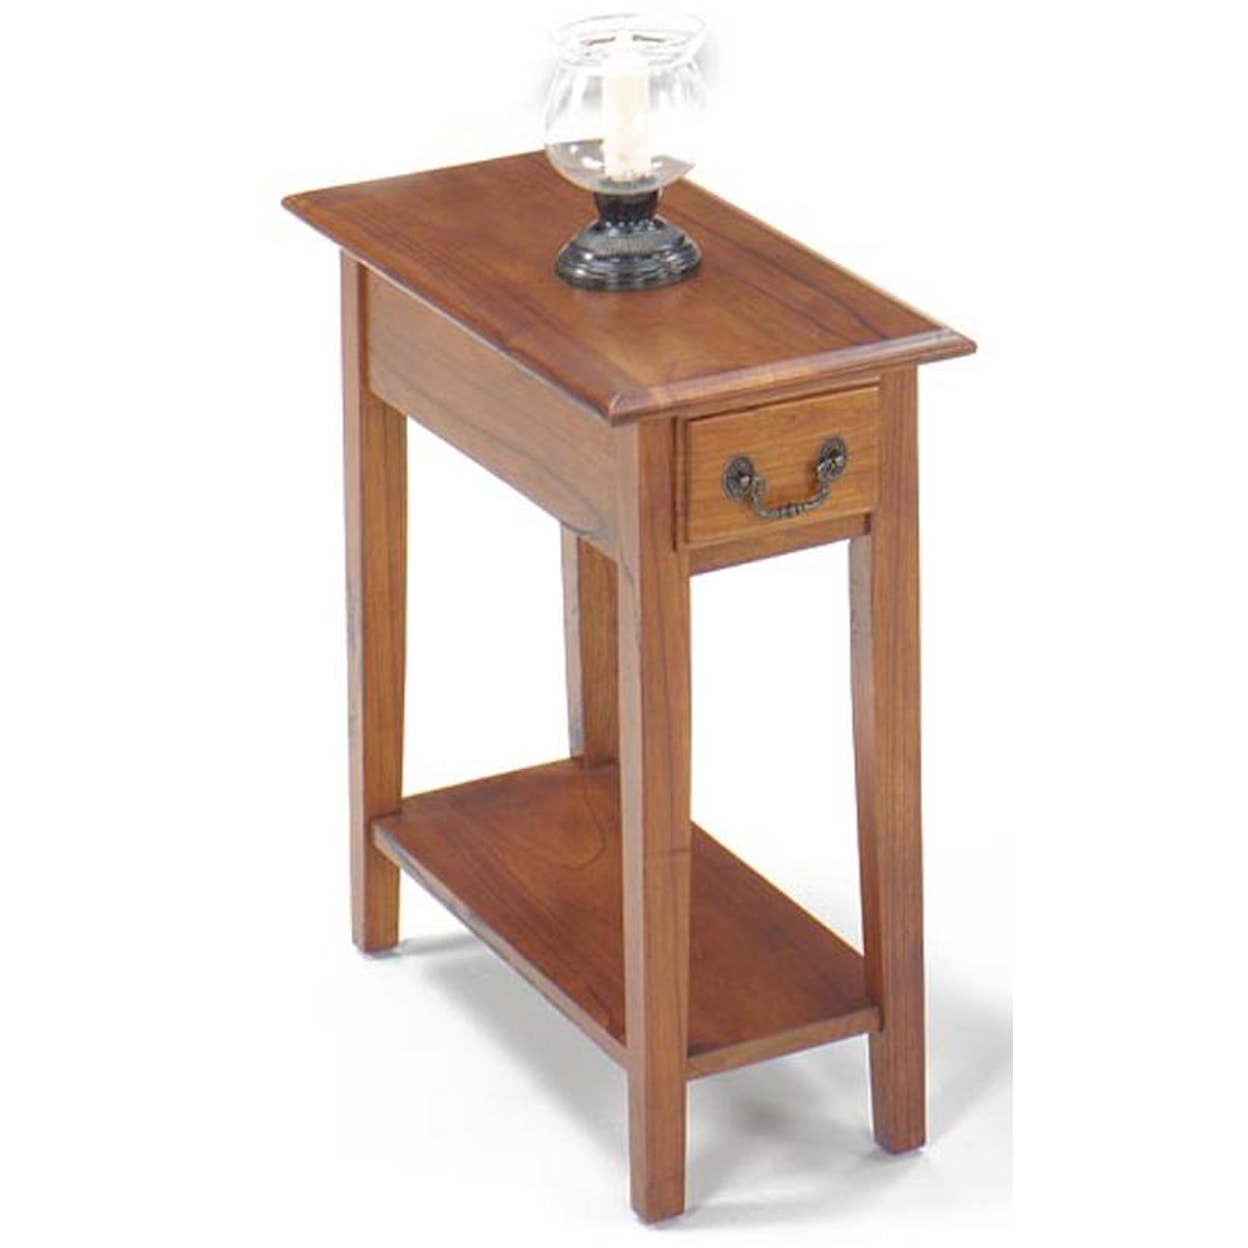 Null Furniture 1900 International Accents Chairside Table